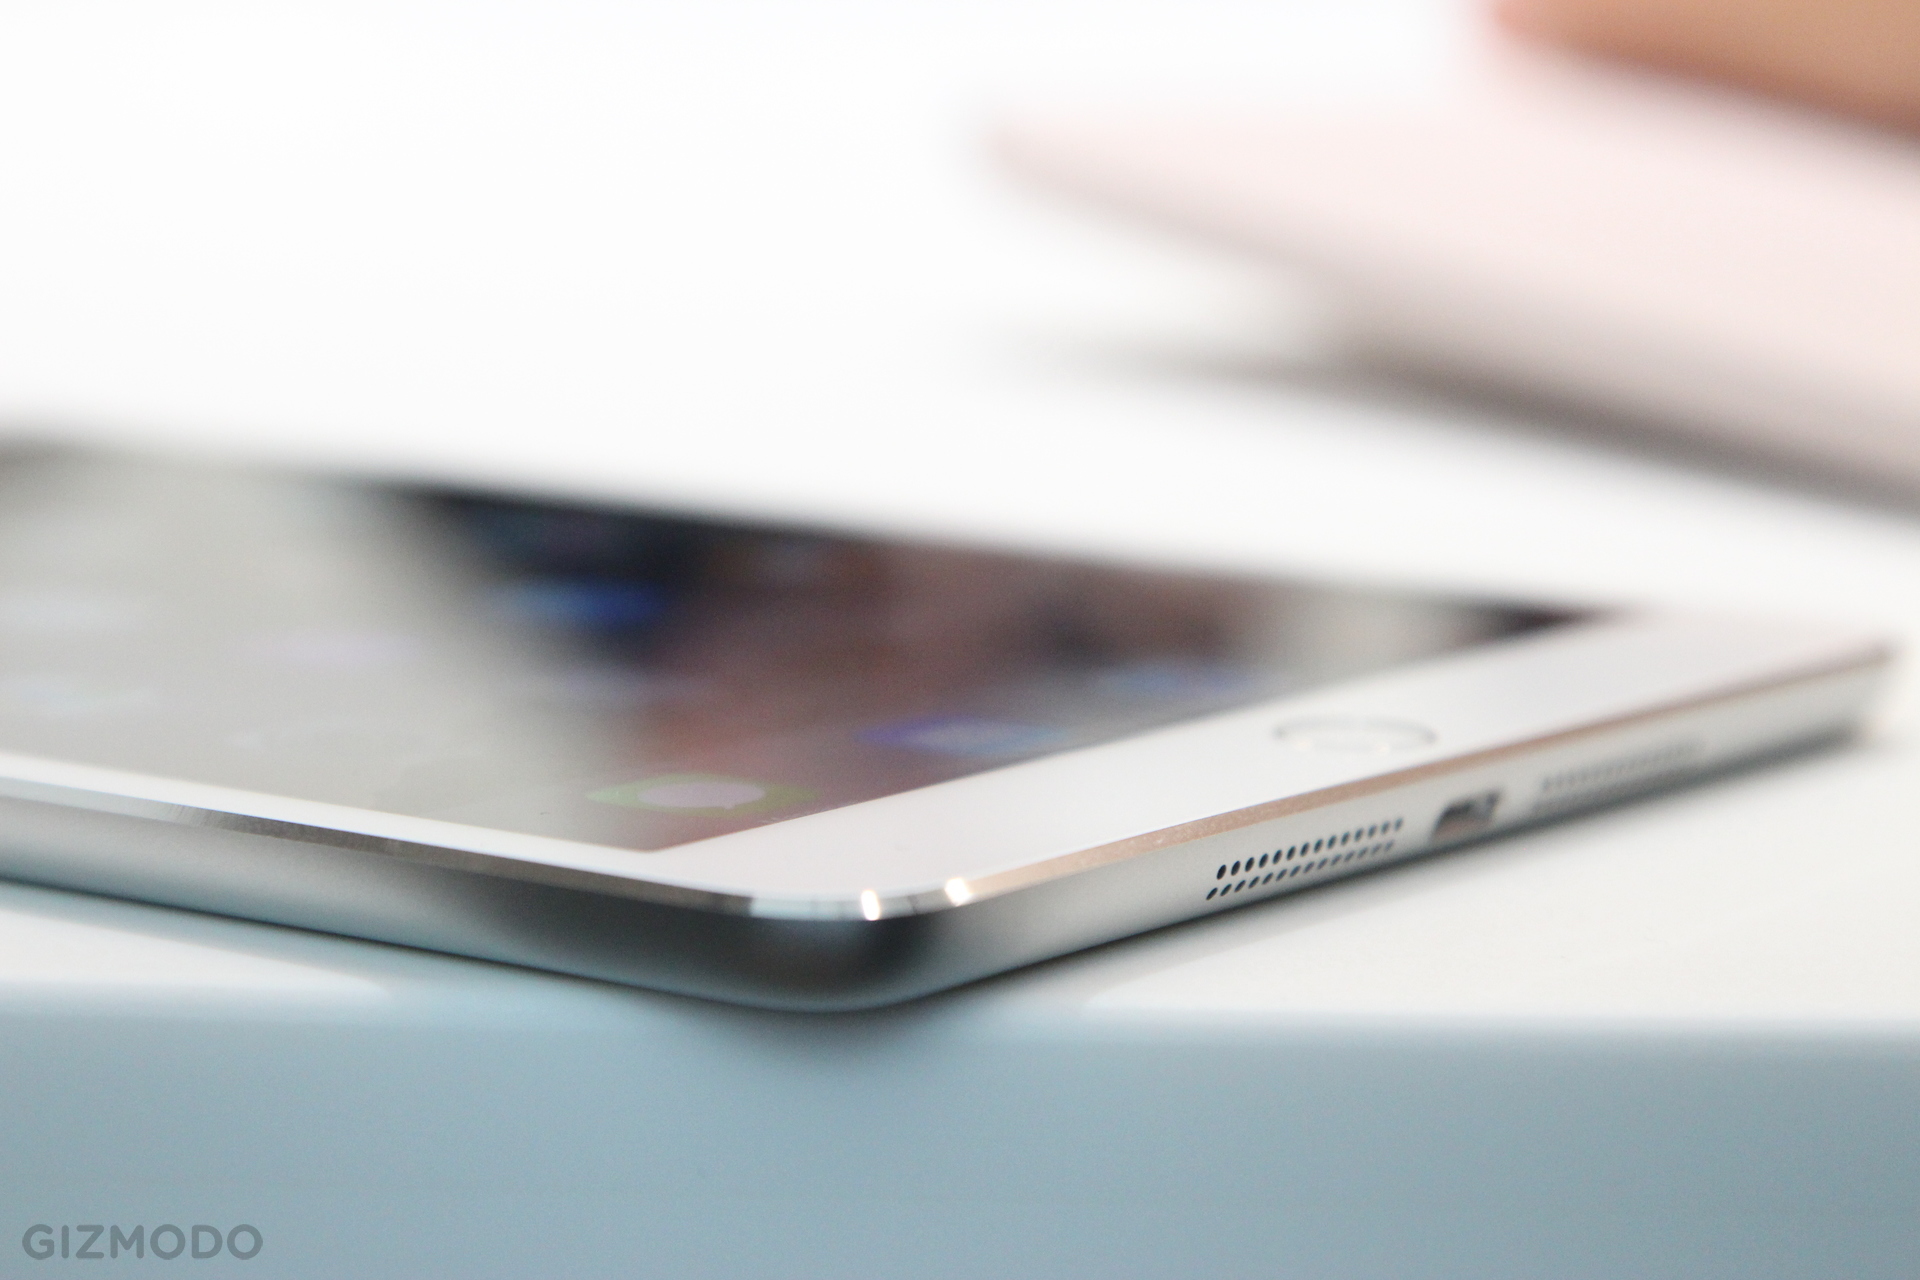 iPad Air 2 And iPad Mini 3 Hands-On: One Of These Tablets Feels Awesome